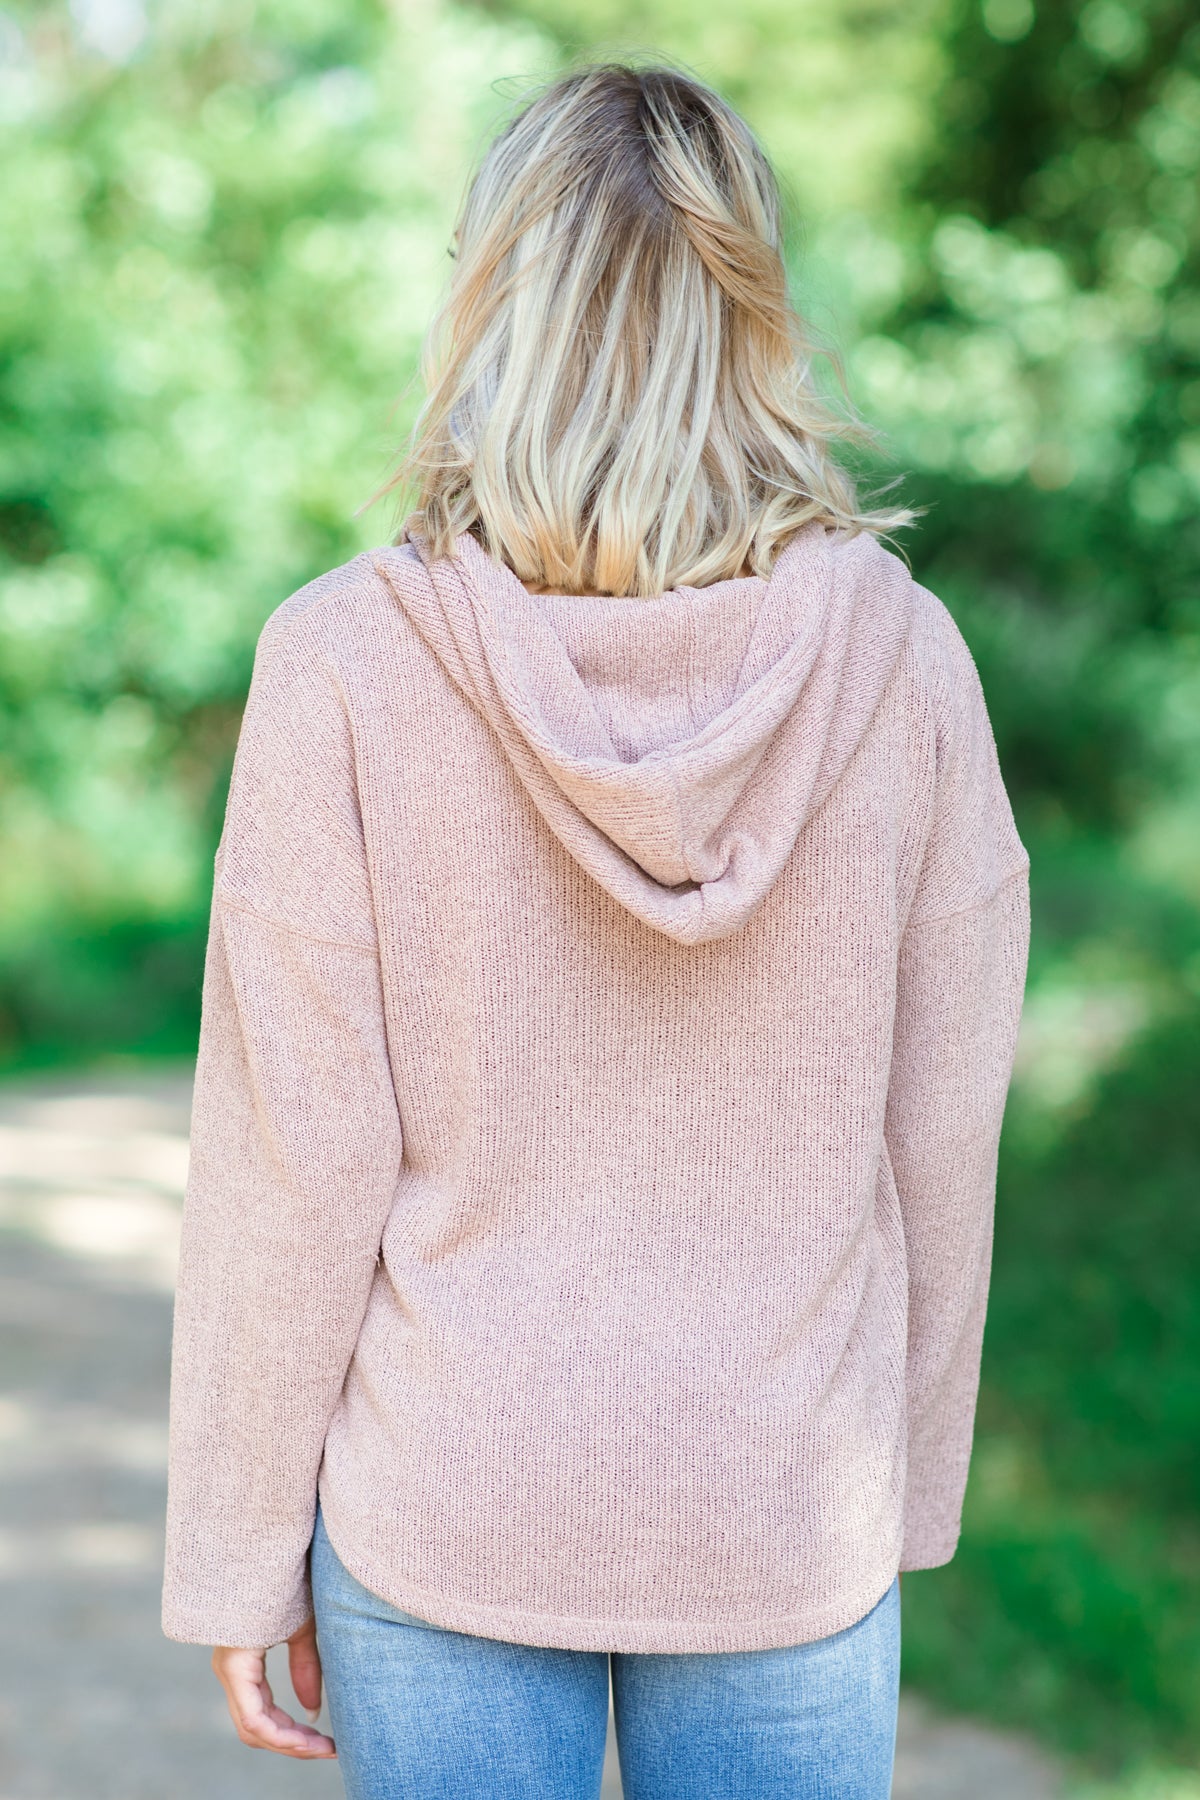 Blush V-Neck Hooded Top - Filly Flair